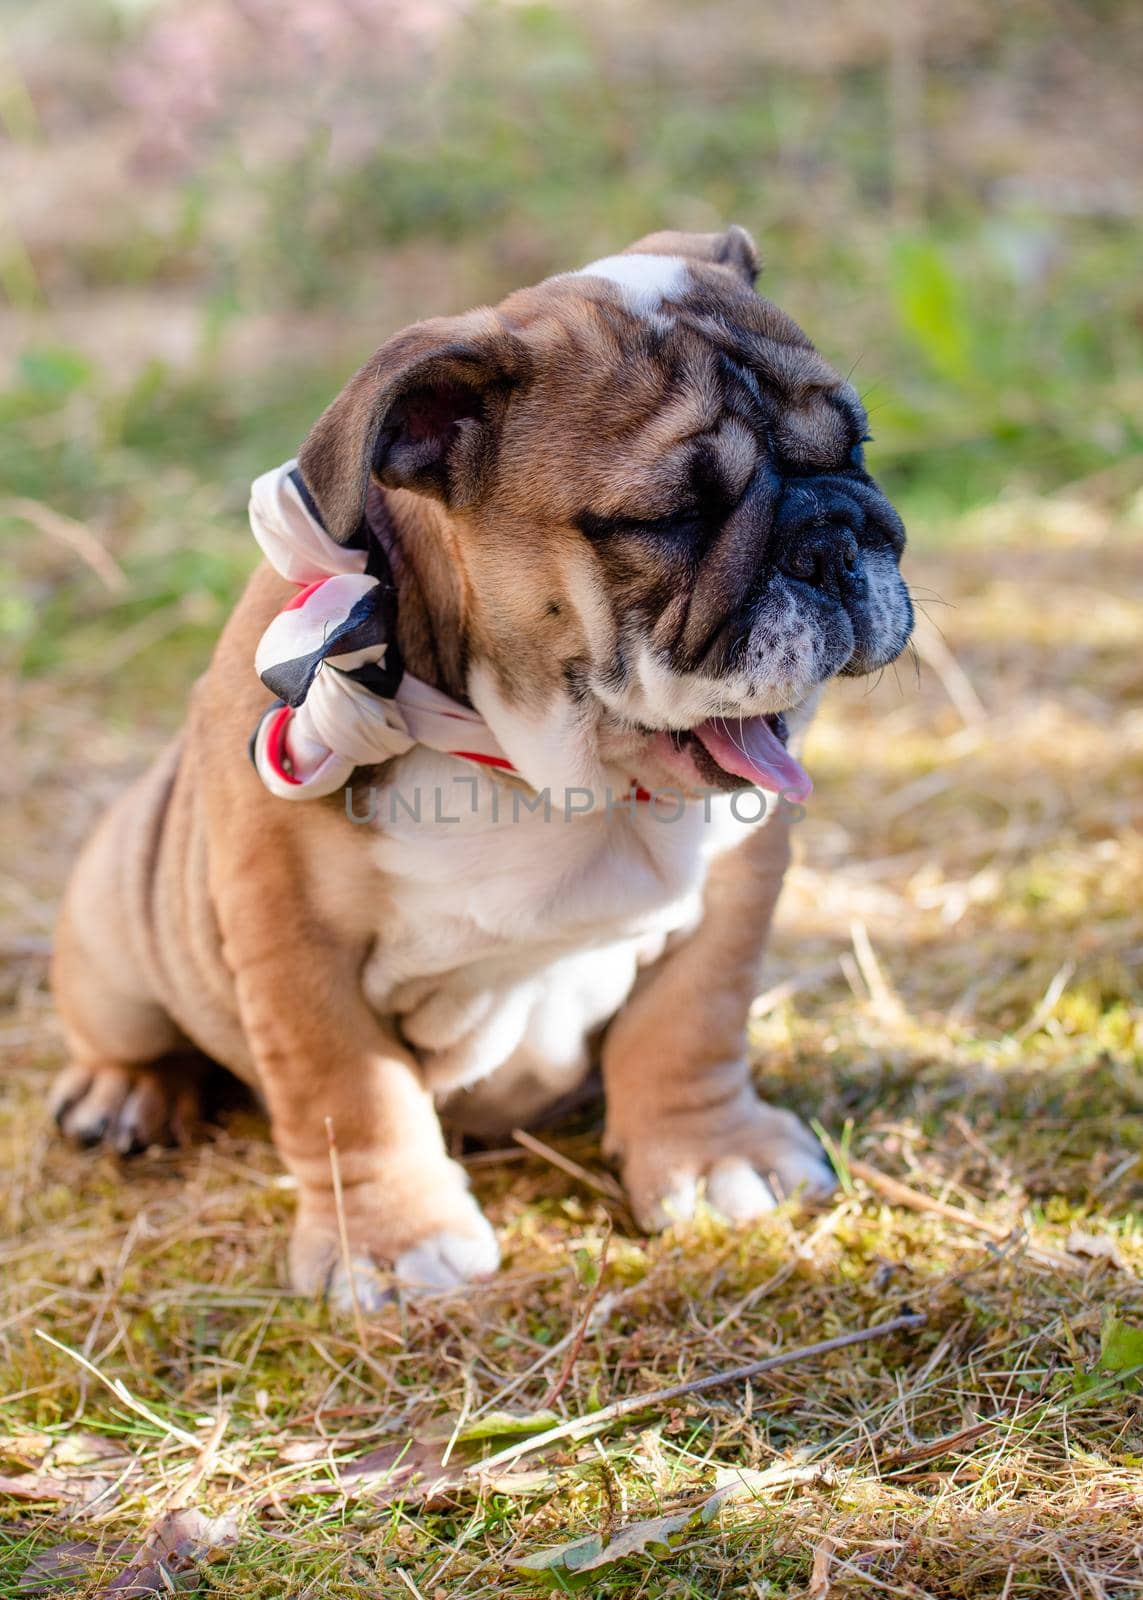 Puppy of Red English British Bulldog in neckless outdoors sitting and yawning on the garden